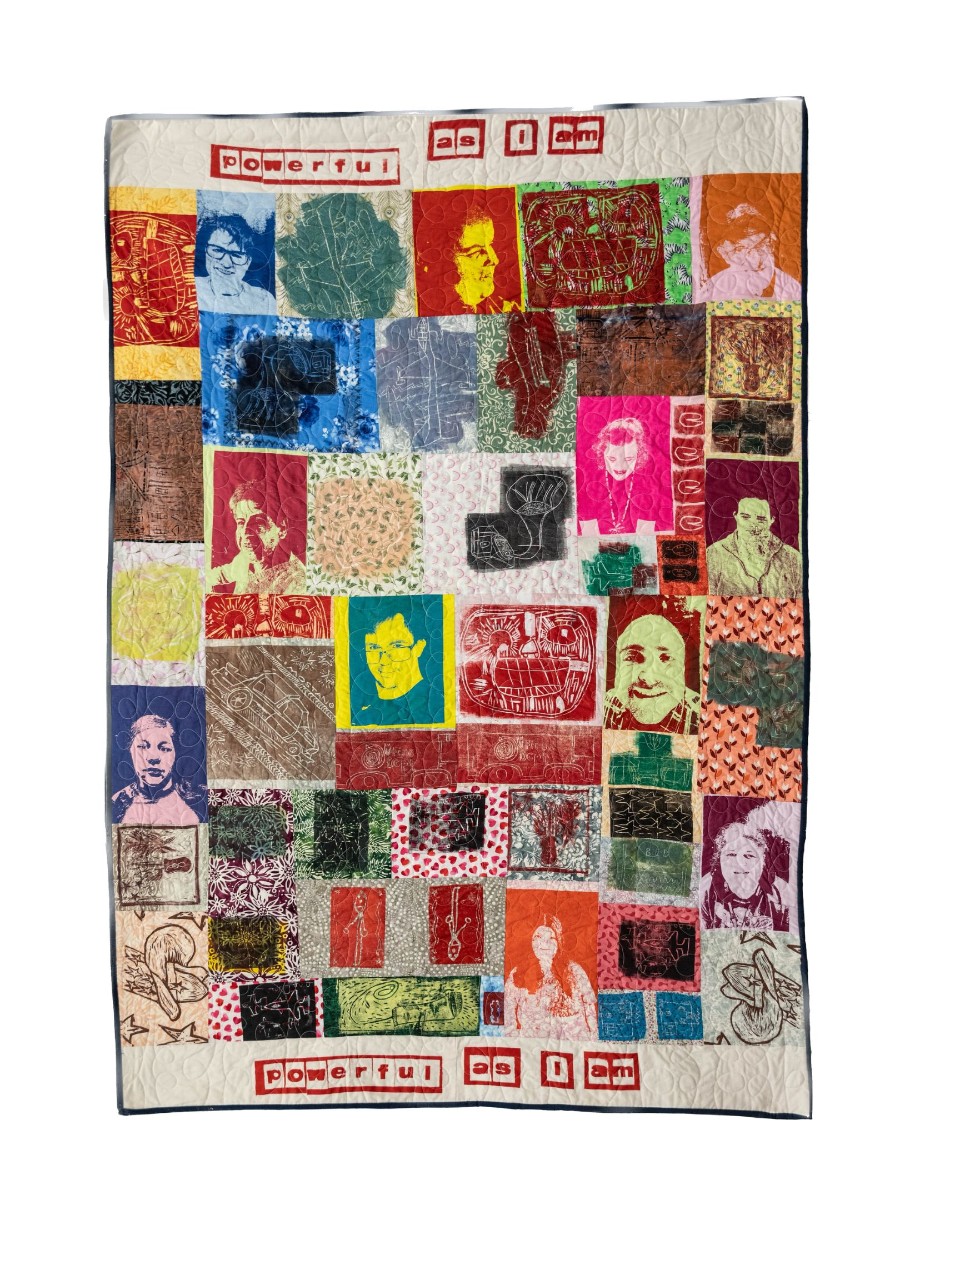 a colorful quilt made of squares of fabric photos of Friend's Life participants